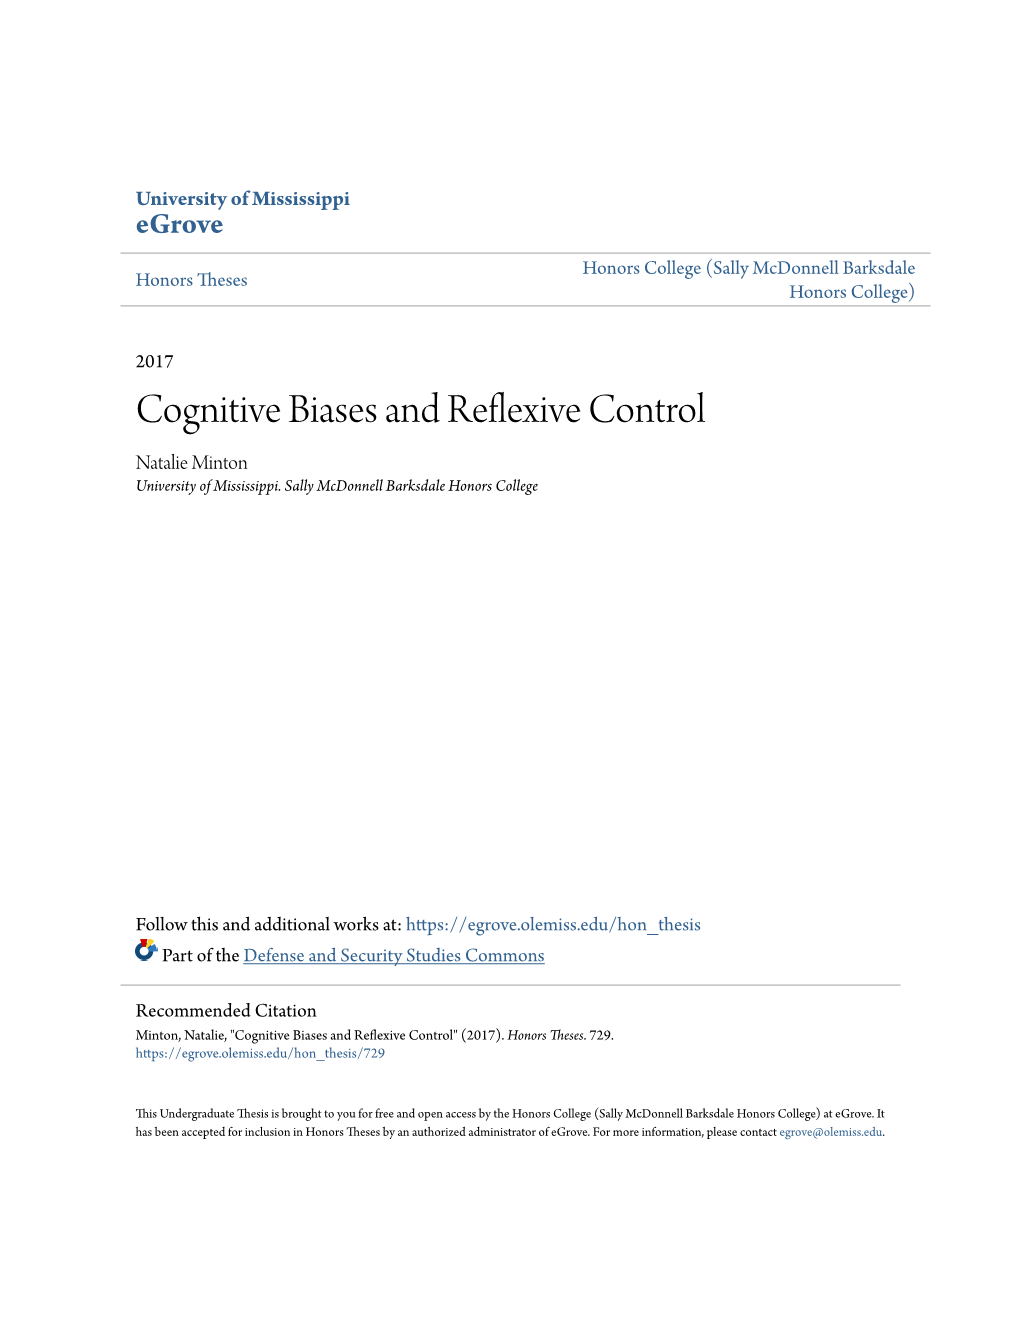 Cognitive Biases and Reflexive Control Natalie Minton University of Mississippi